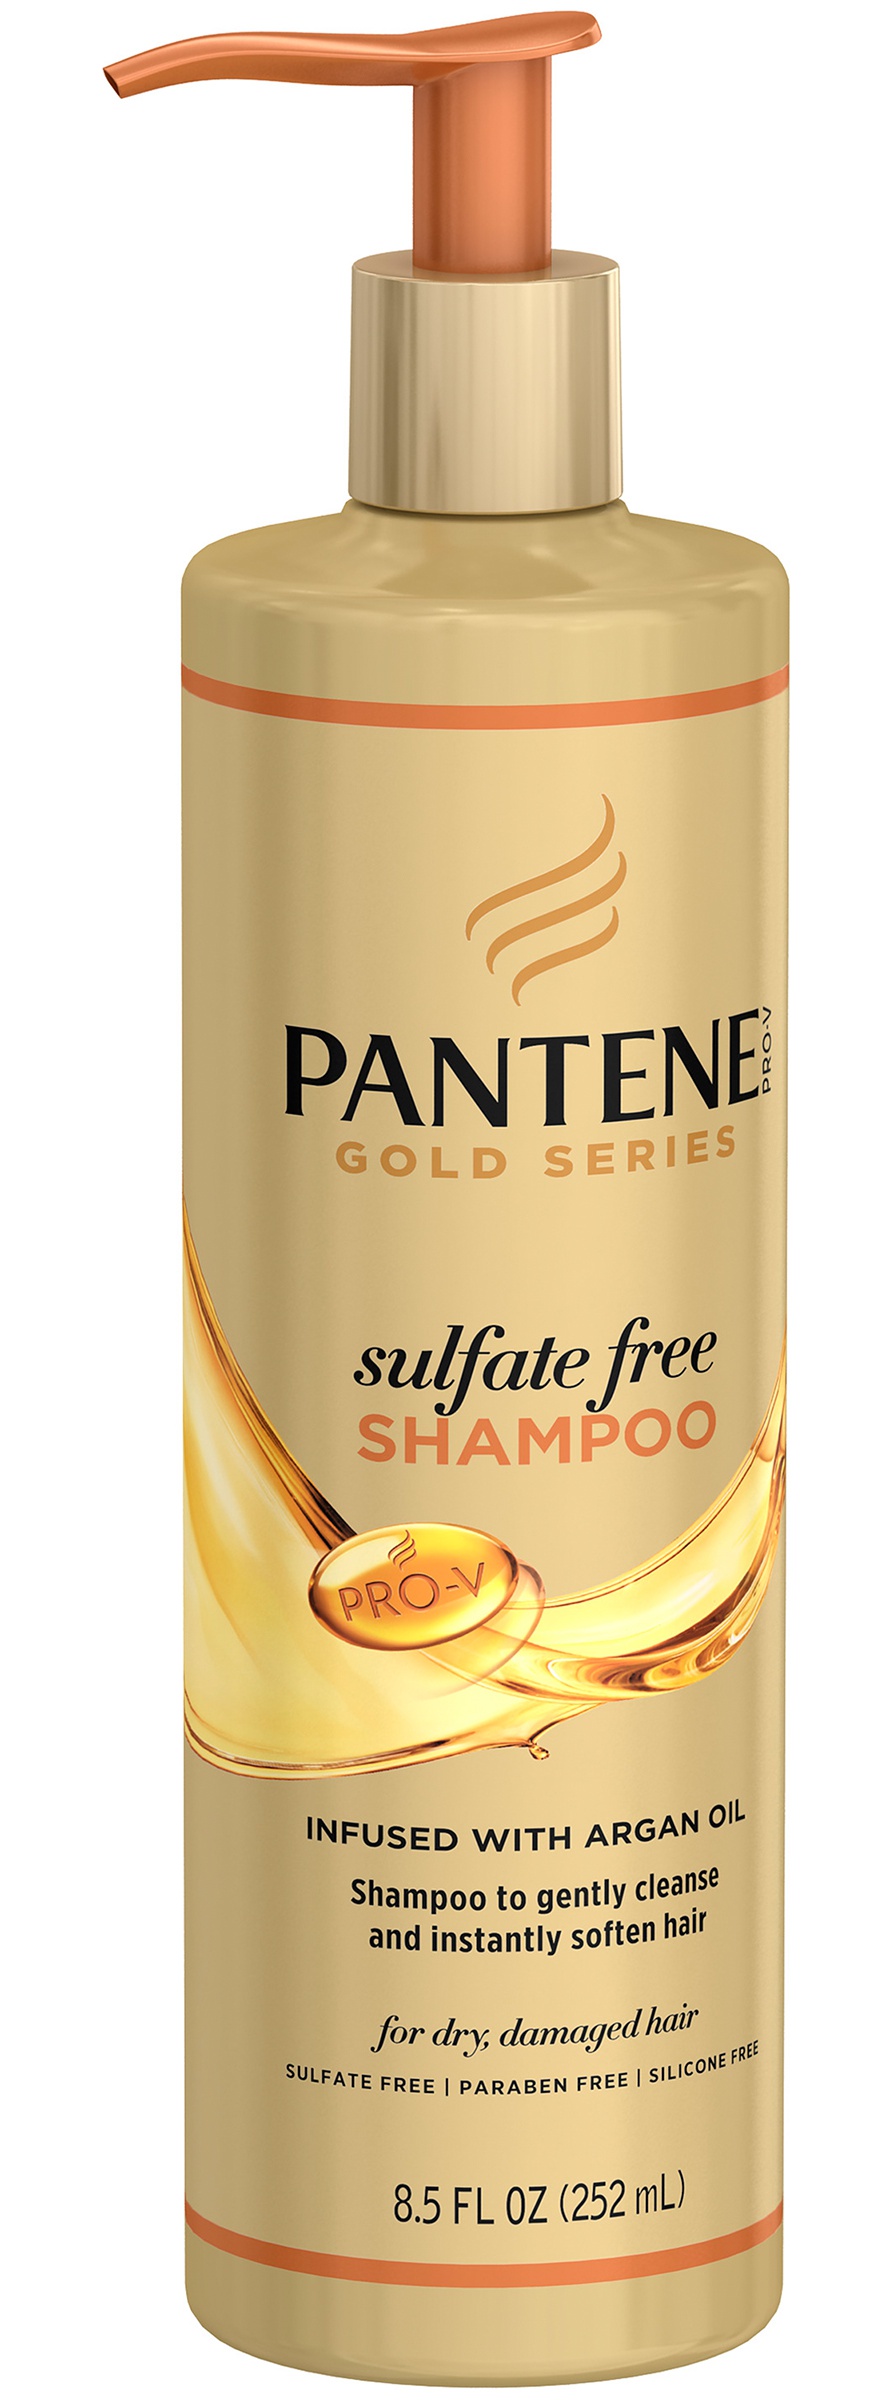 pantene-gold-series-sulfate-free-shampoo-ingredients-explained